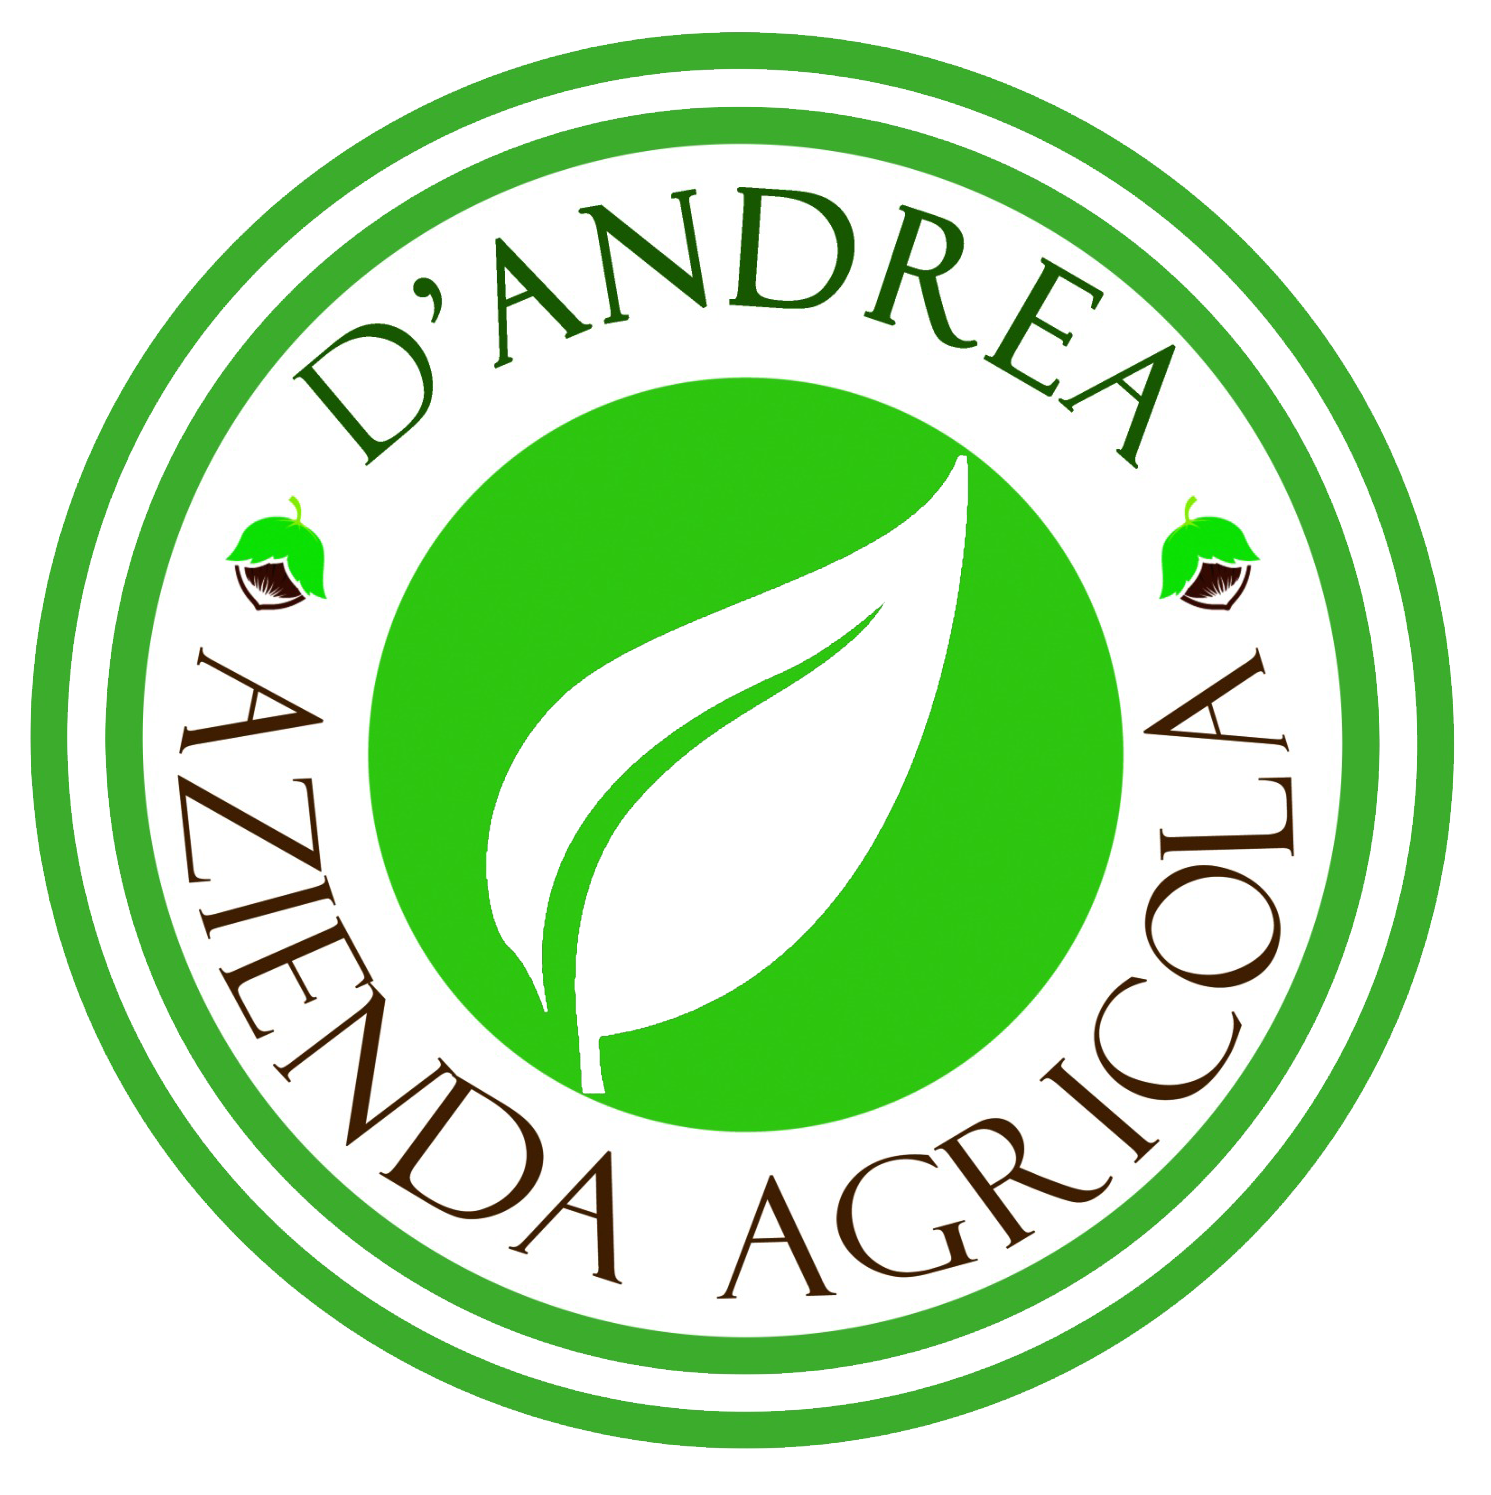 Agricola D'Andrea